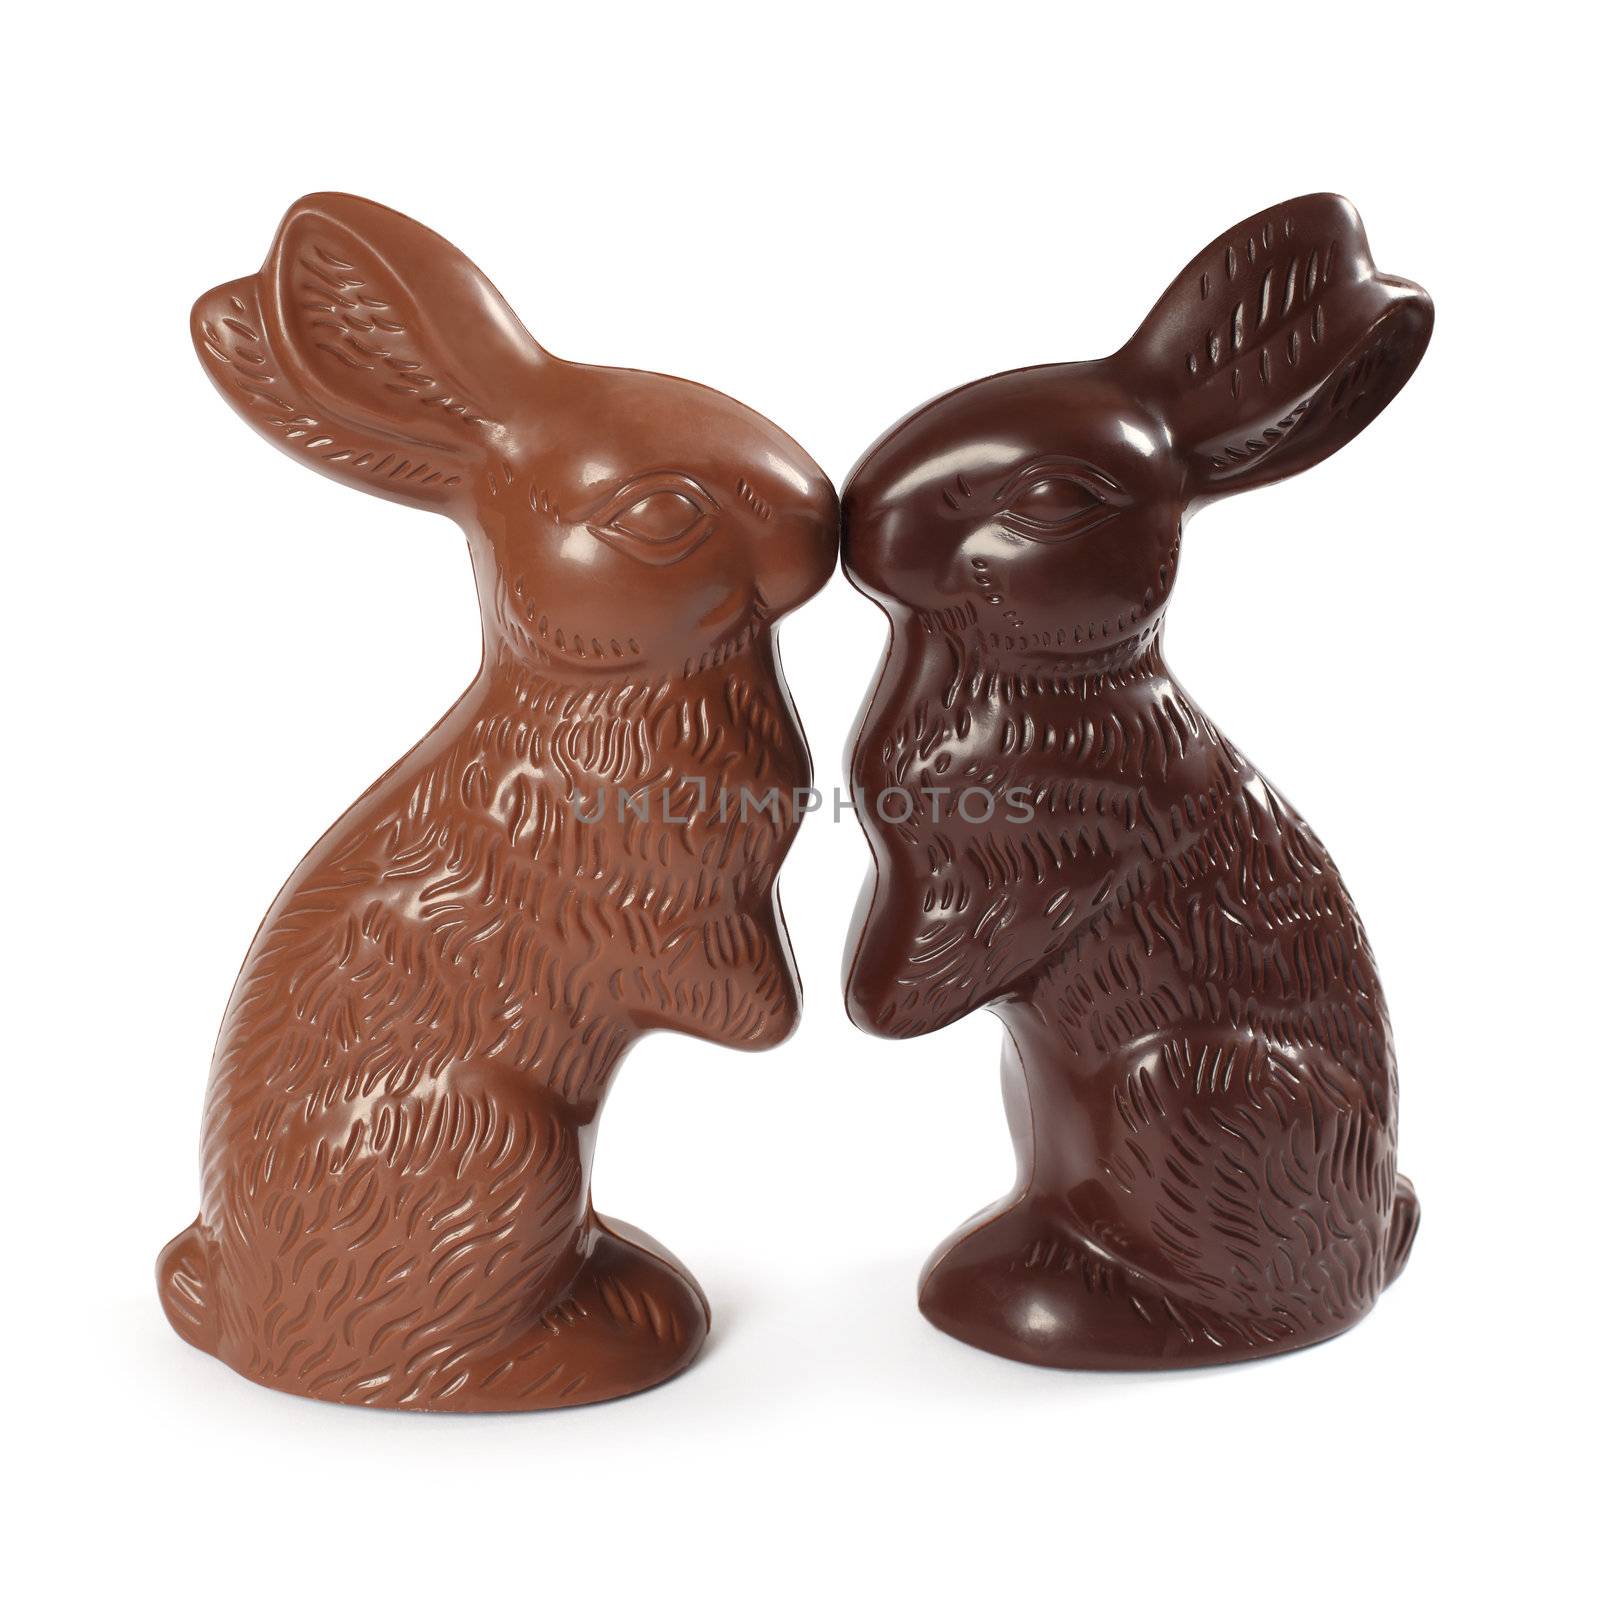 Photo of two chocolate Easter bunnies kissing, one milk chocolate and one dark chocolate. Clipping Path included.